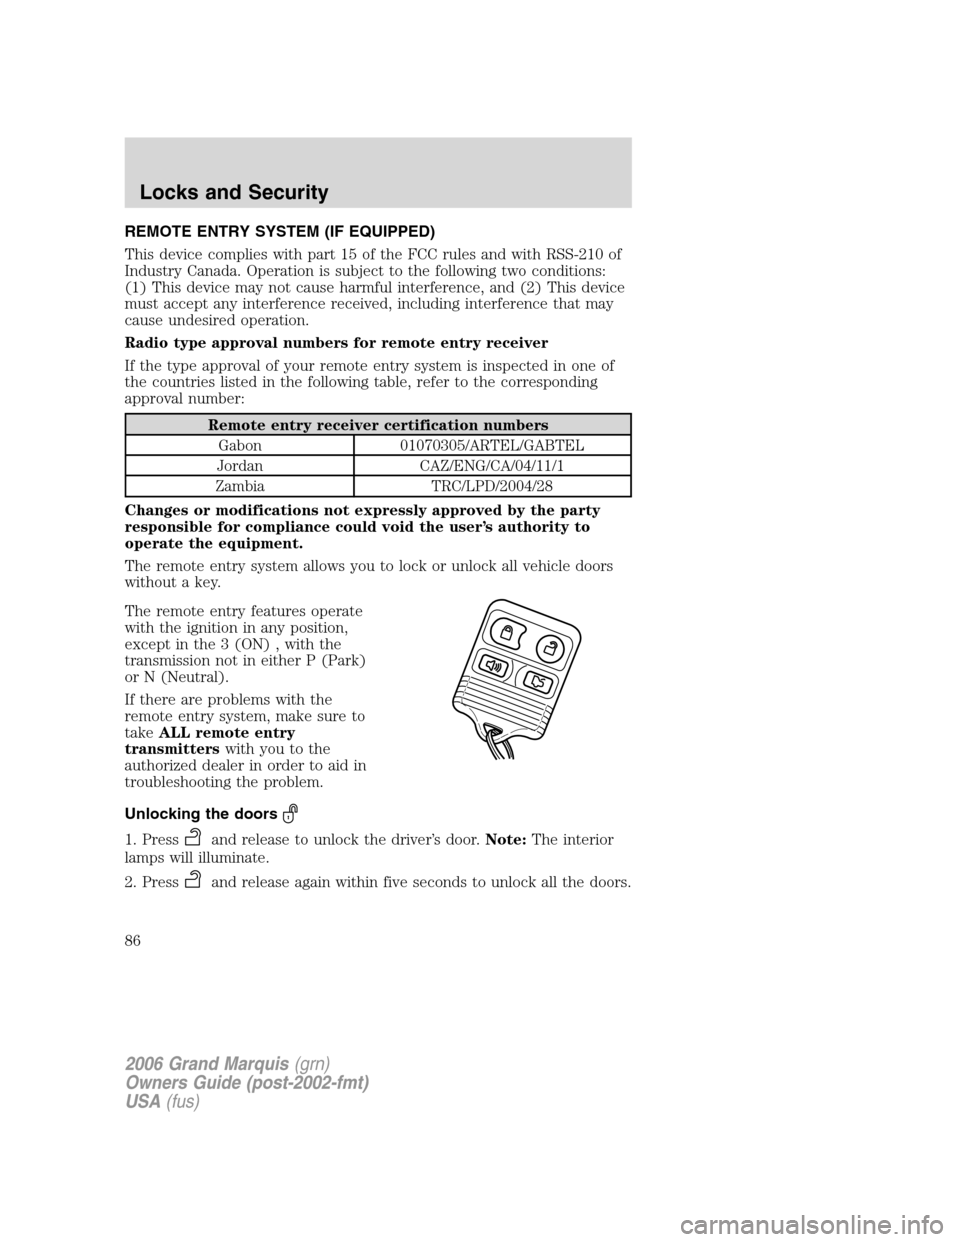 Mercury Grand Marquis 2006  Owners Manuals REMOTE ENTRY SYSTEM (IF EQUIPPED)
This device complies with part 15 of the FCC rules and with RSS-210 of
Industry Canada. Operation is subject to the following two conditions:
(1) This device may not 